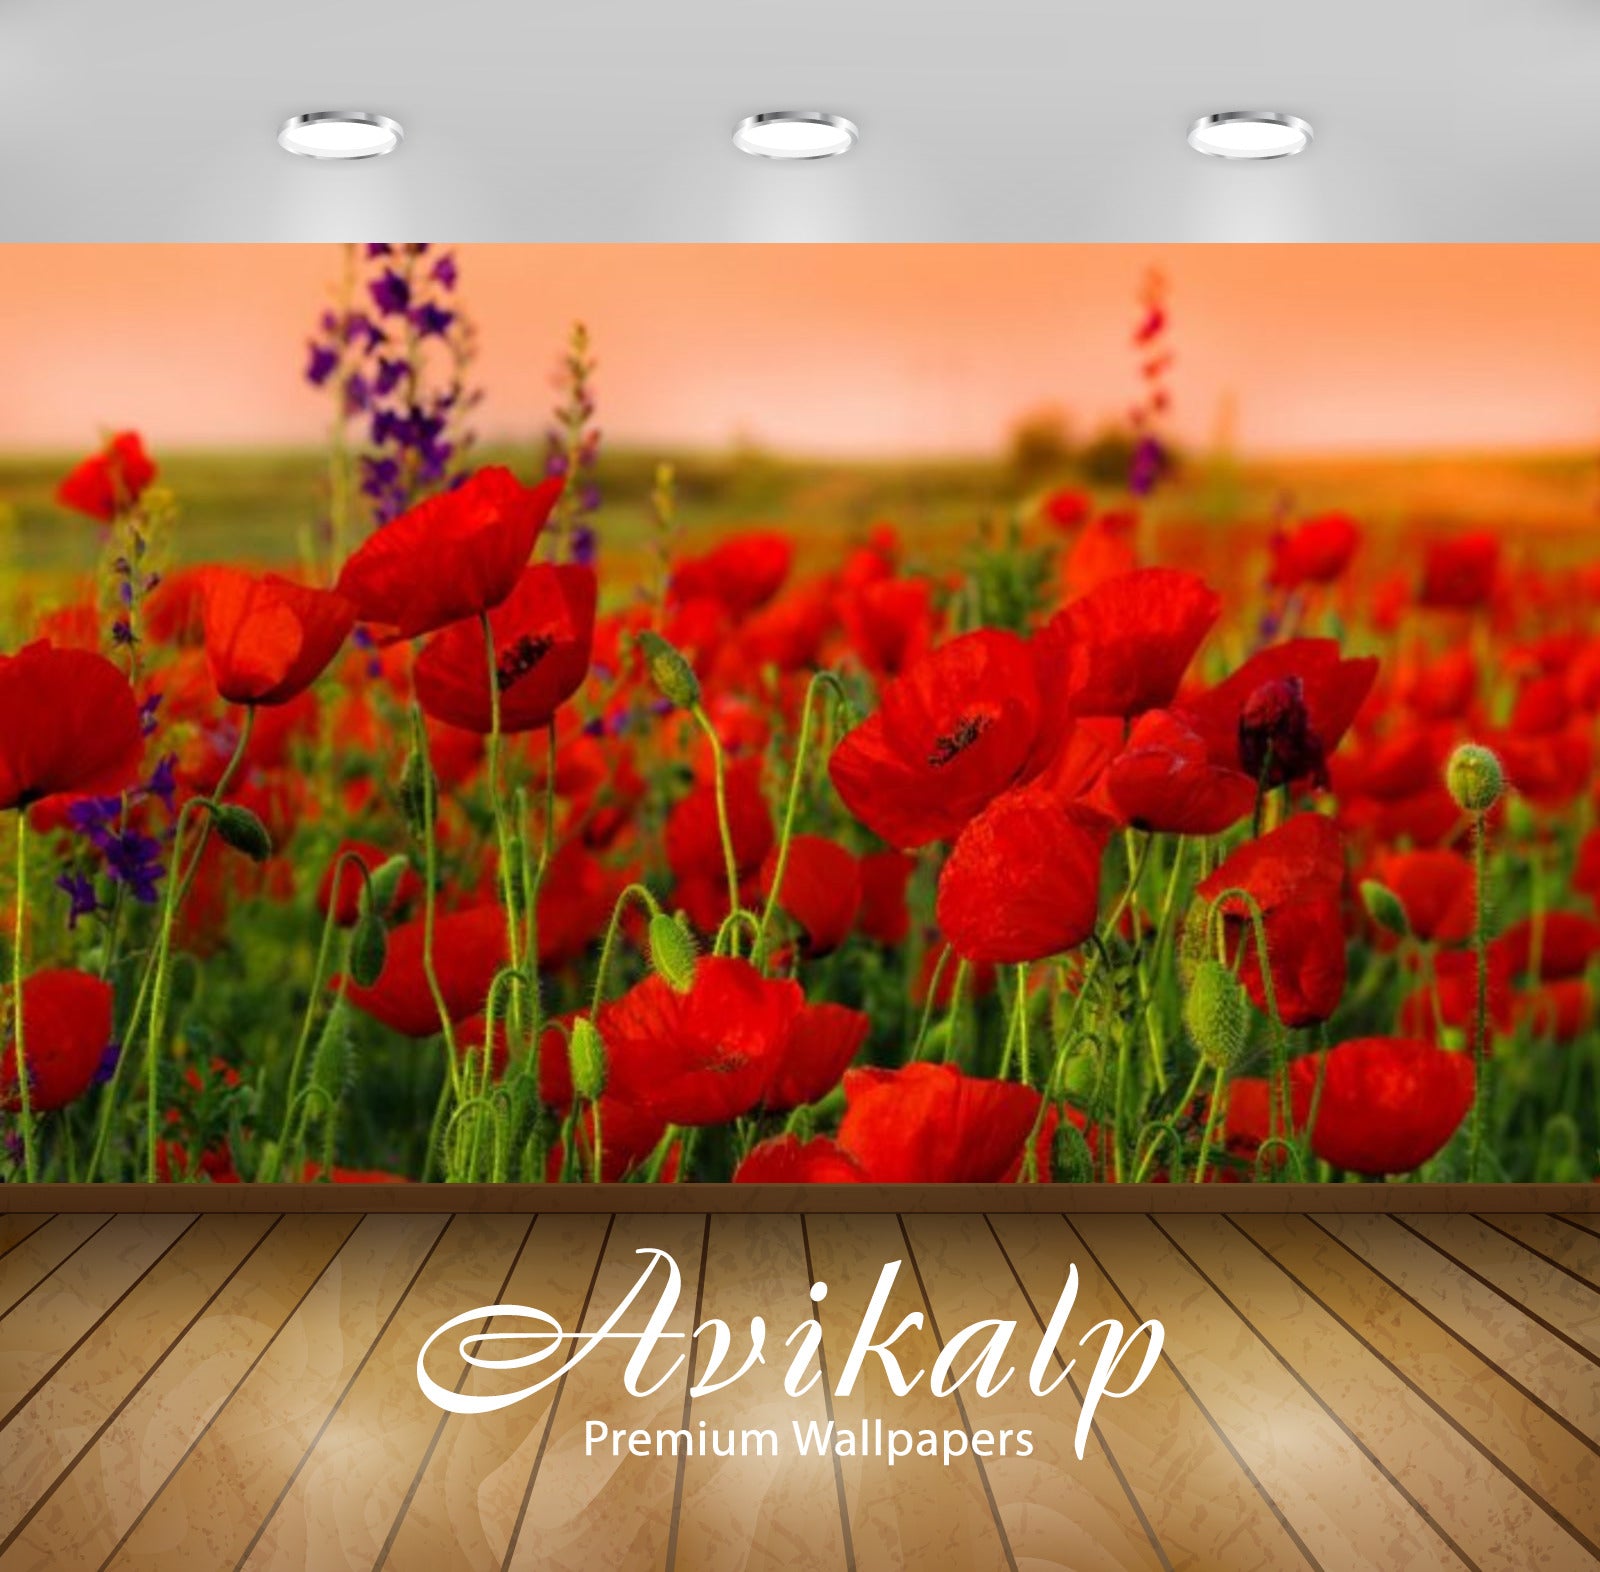 Avikalp Exclusive Awi2937 Red Flowers Full HD Wallpapers for Living room, Hall, Kids Room, Kitchen,